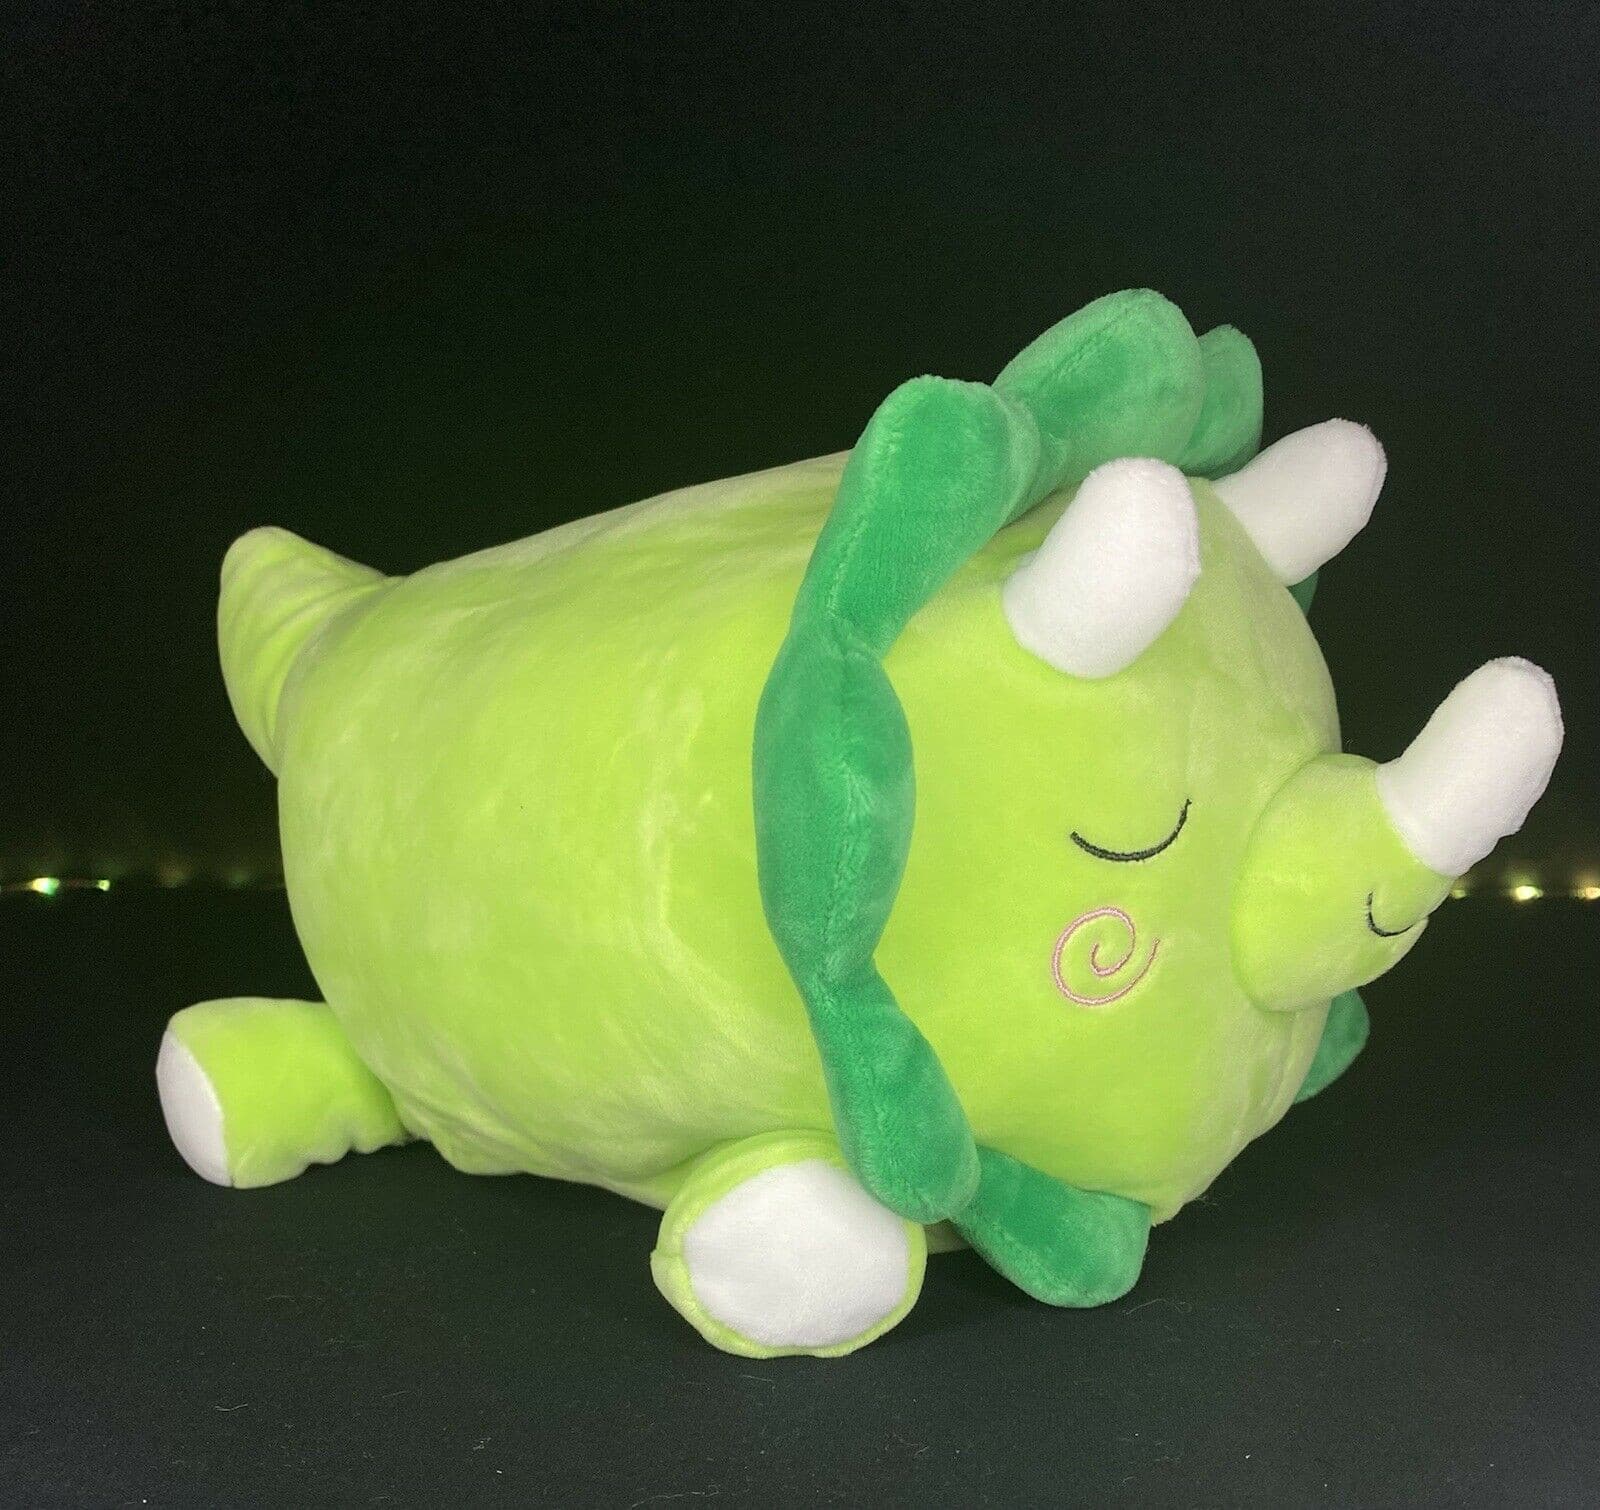 Squishmallow 9” Tristan The Green Triceratops Cuddler Plush KellyToy NWT | Sweet Magnolia Charms.